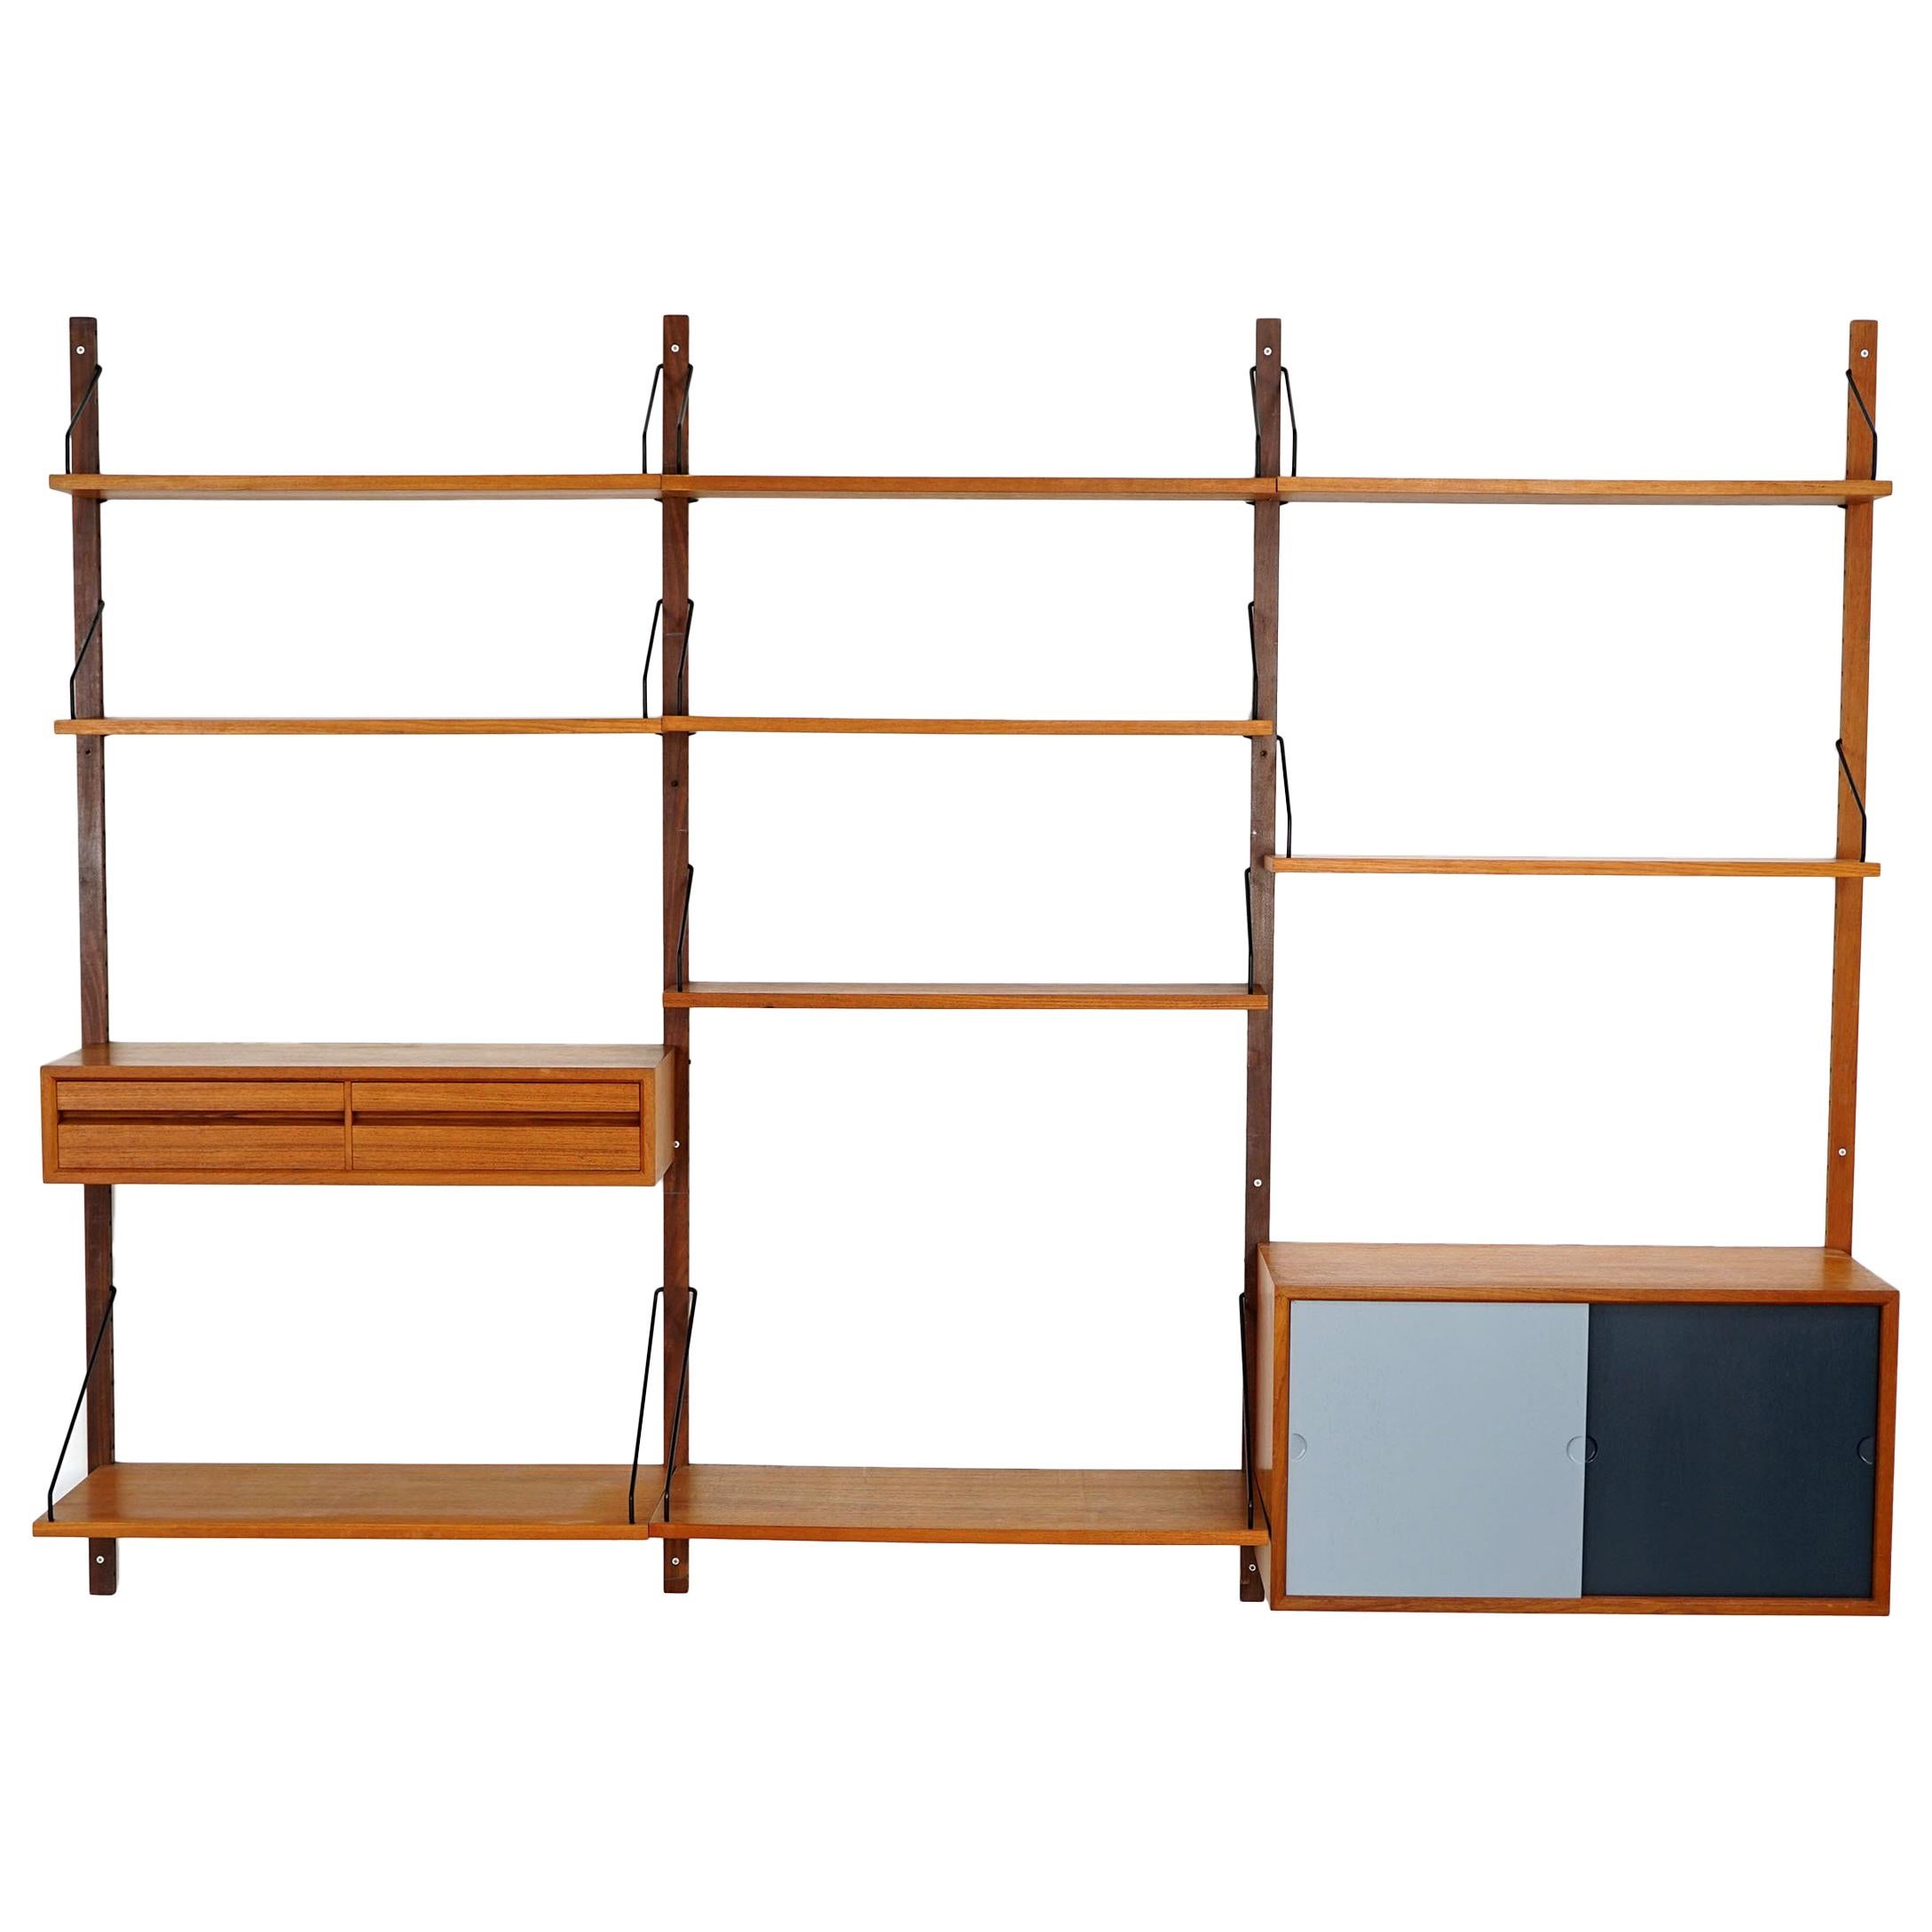 Royal System, Teak Wall Unit by Poul Cadovius for Cado, 1960s